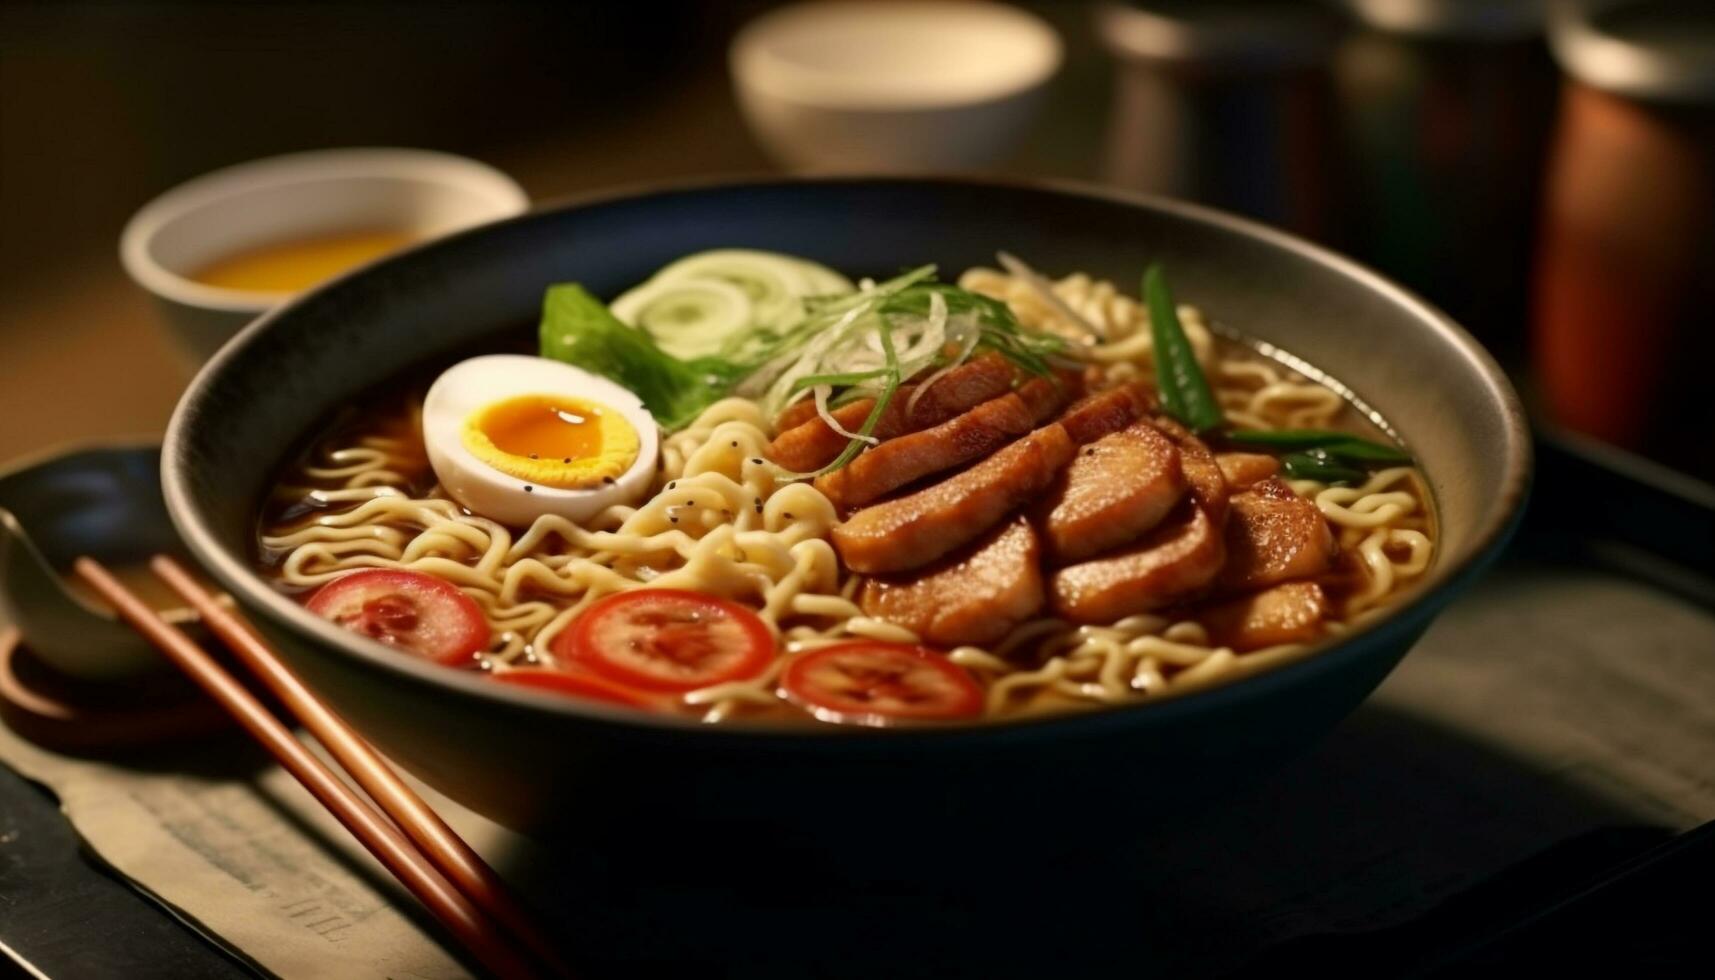 Freshly cooked ramen noodles with pork, vegetables, and miso soup generated by AI photo